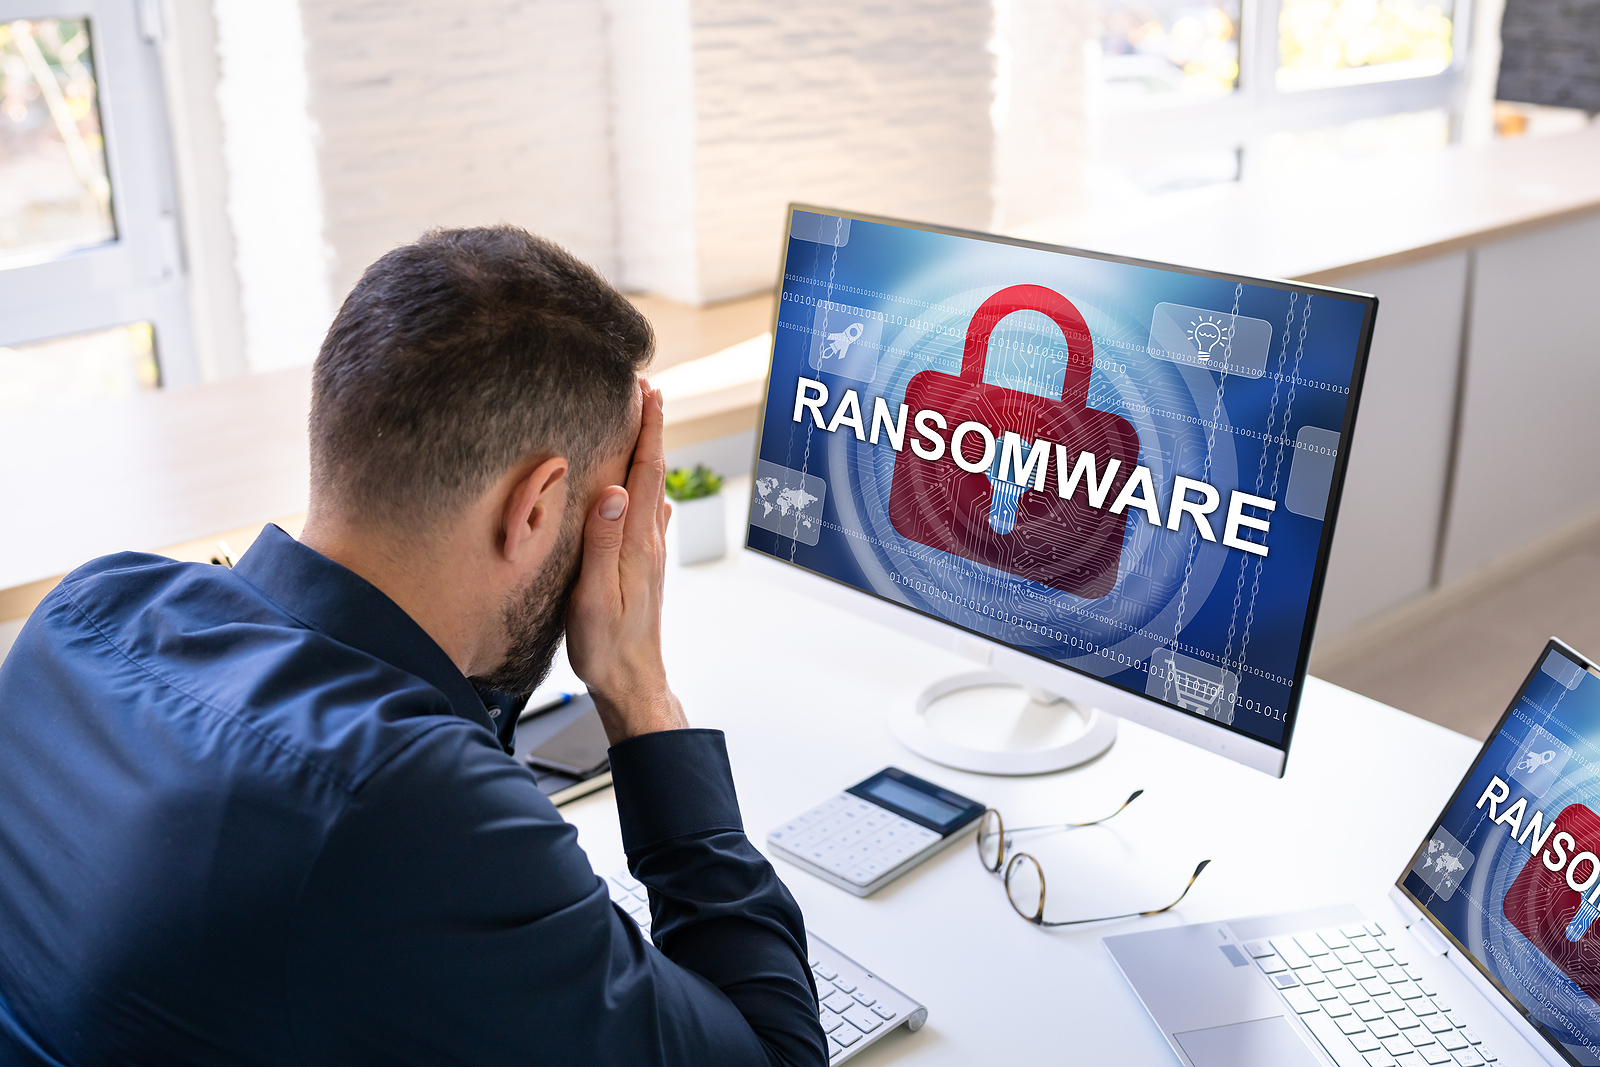 royal-ransomware-possibly-rebranding-after-targeting-350-organizations-worldwide